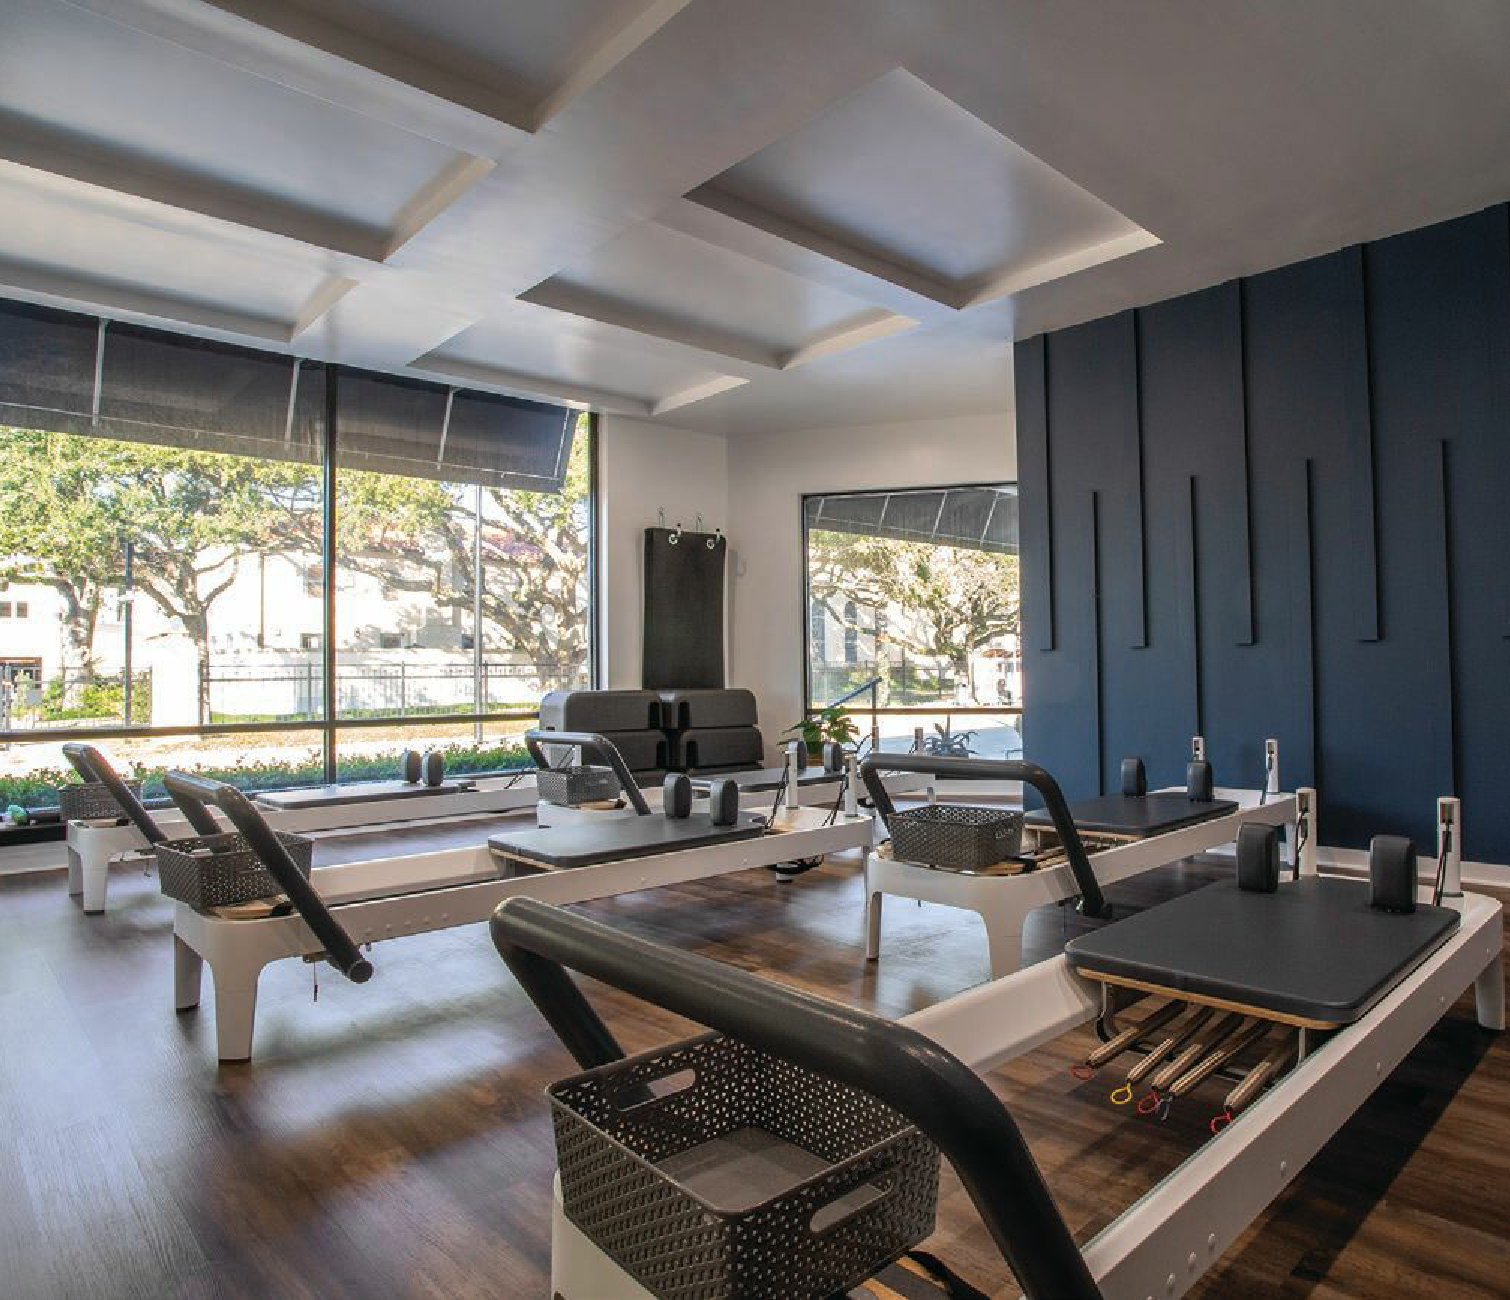 Reformer Pilates classes start at $30 with top trained professionals who work with individuals to target any particular goals or needs. STUDIO PHOTO COURTESY OF KARMAN LOVELY